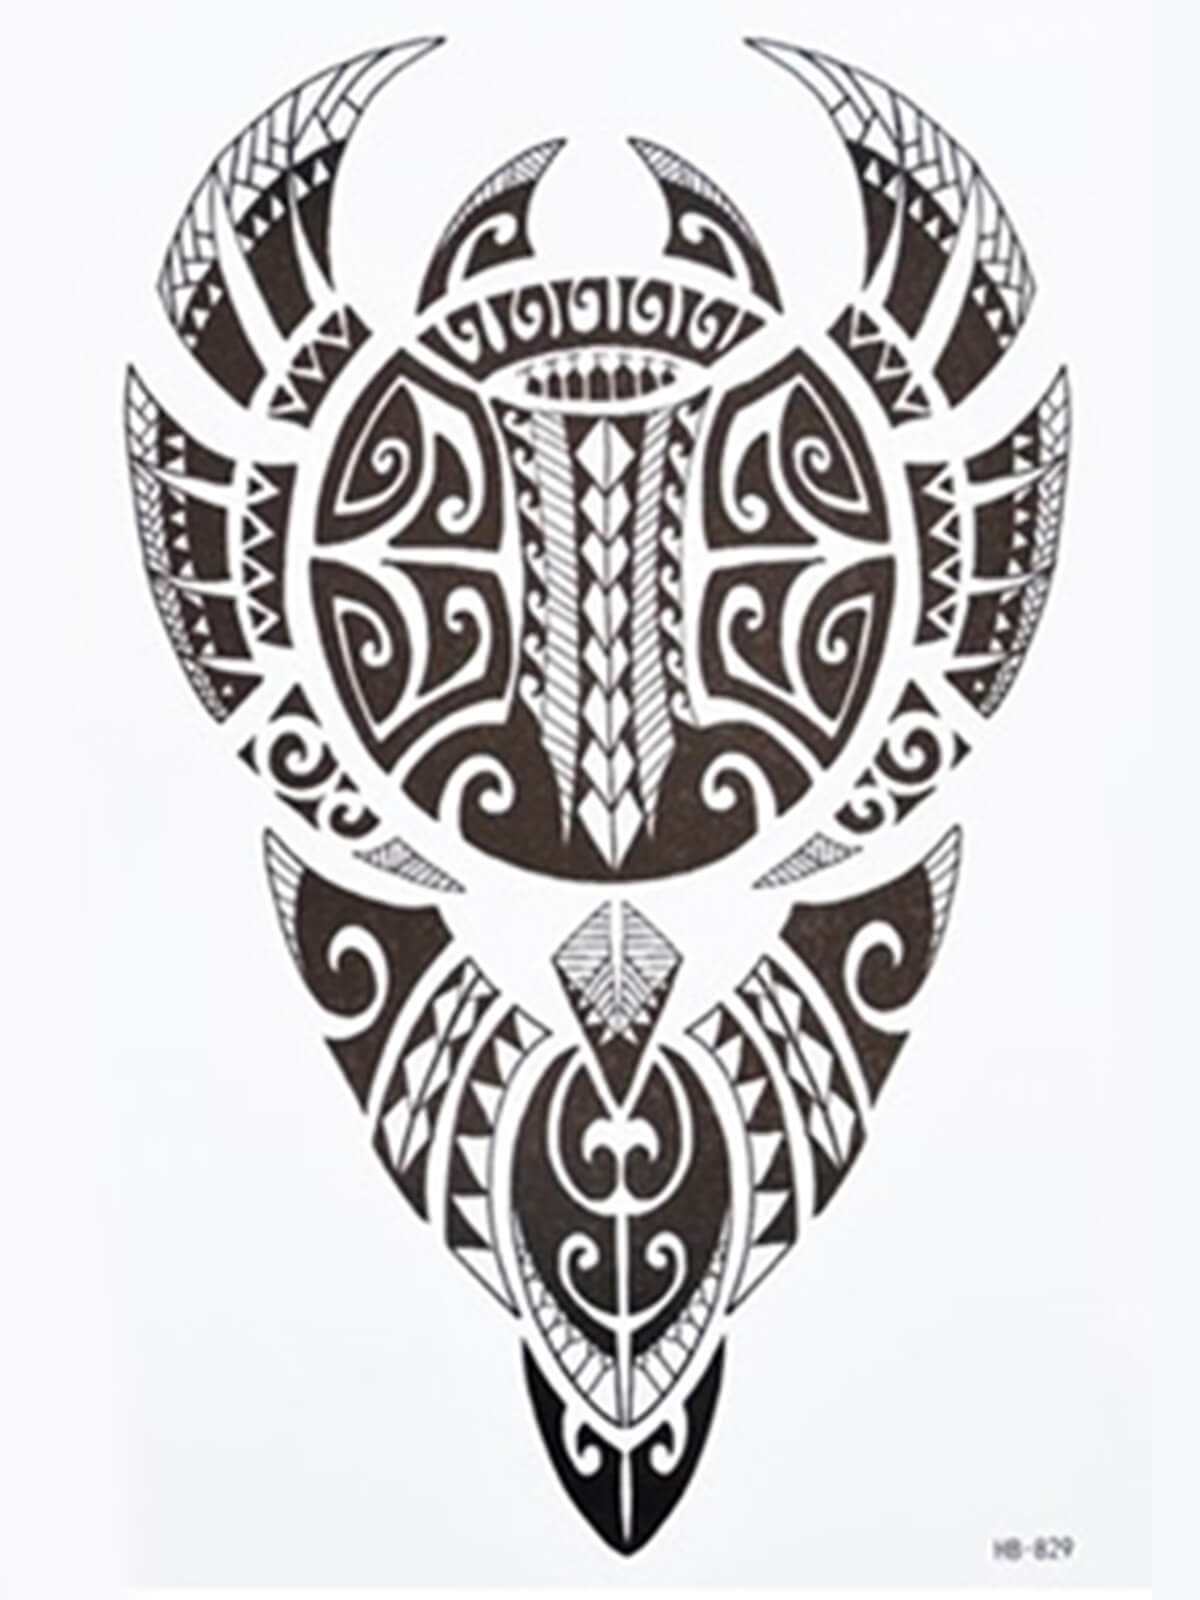 Large Temporary Tattoos in various designs.